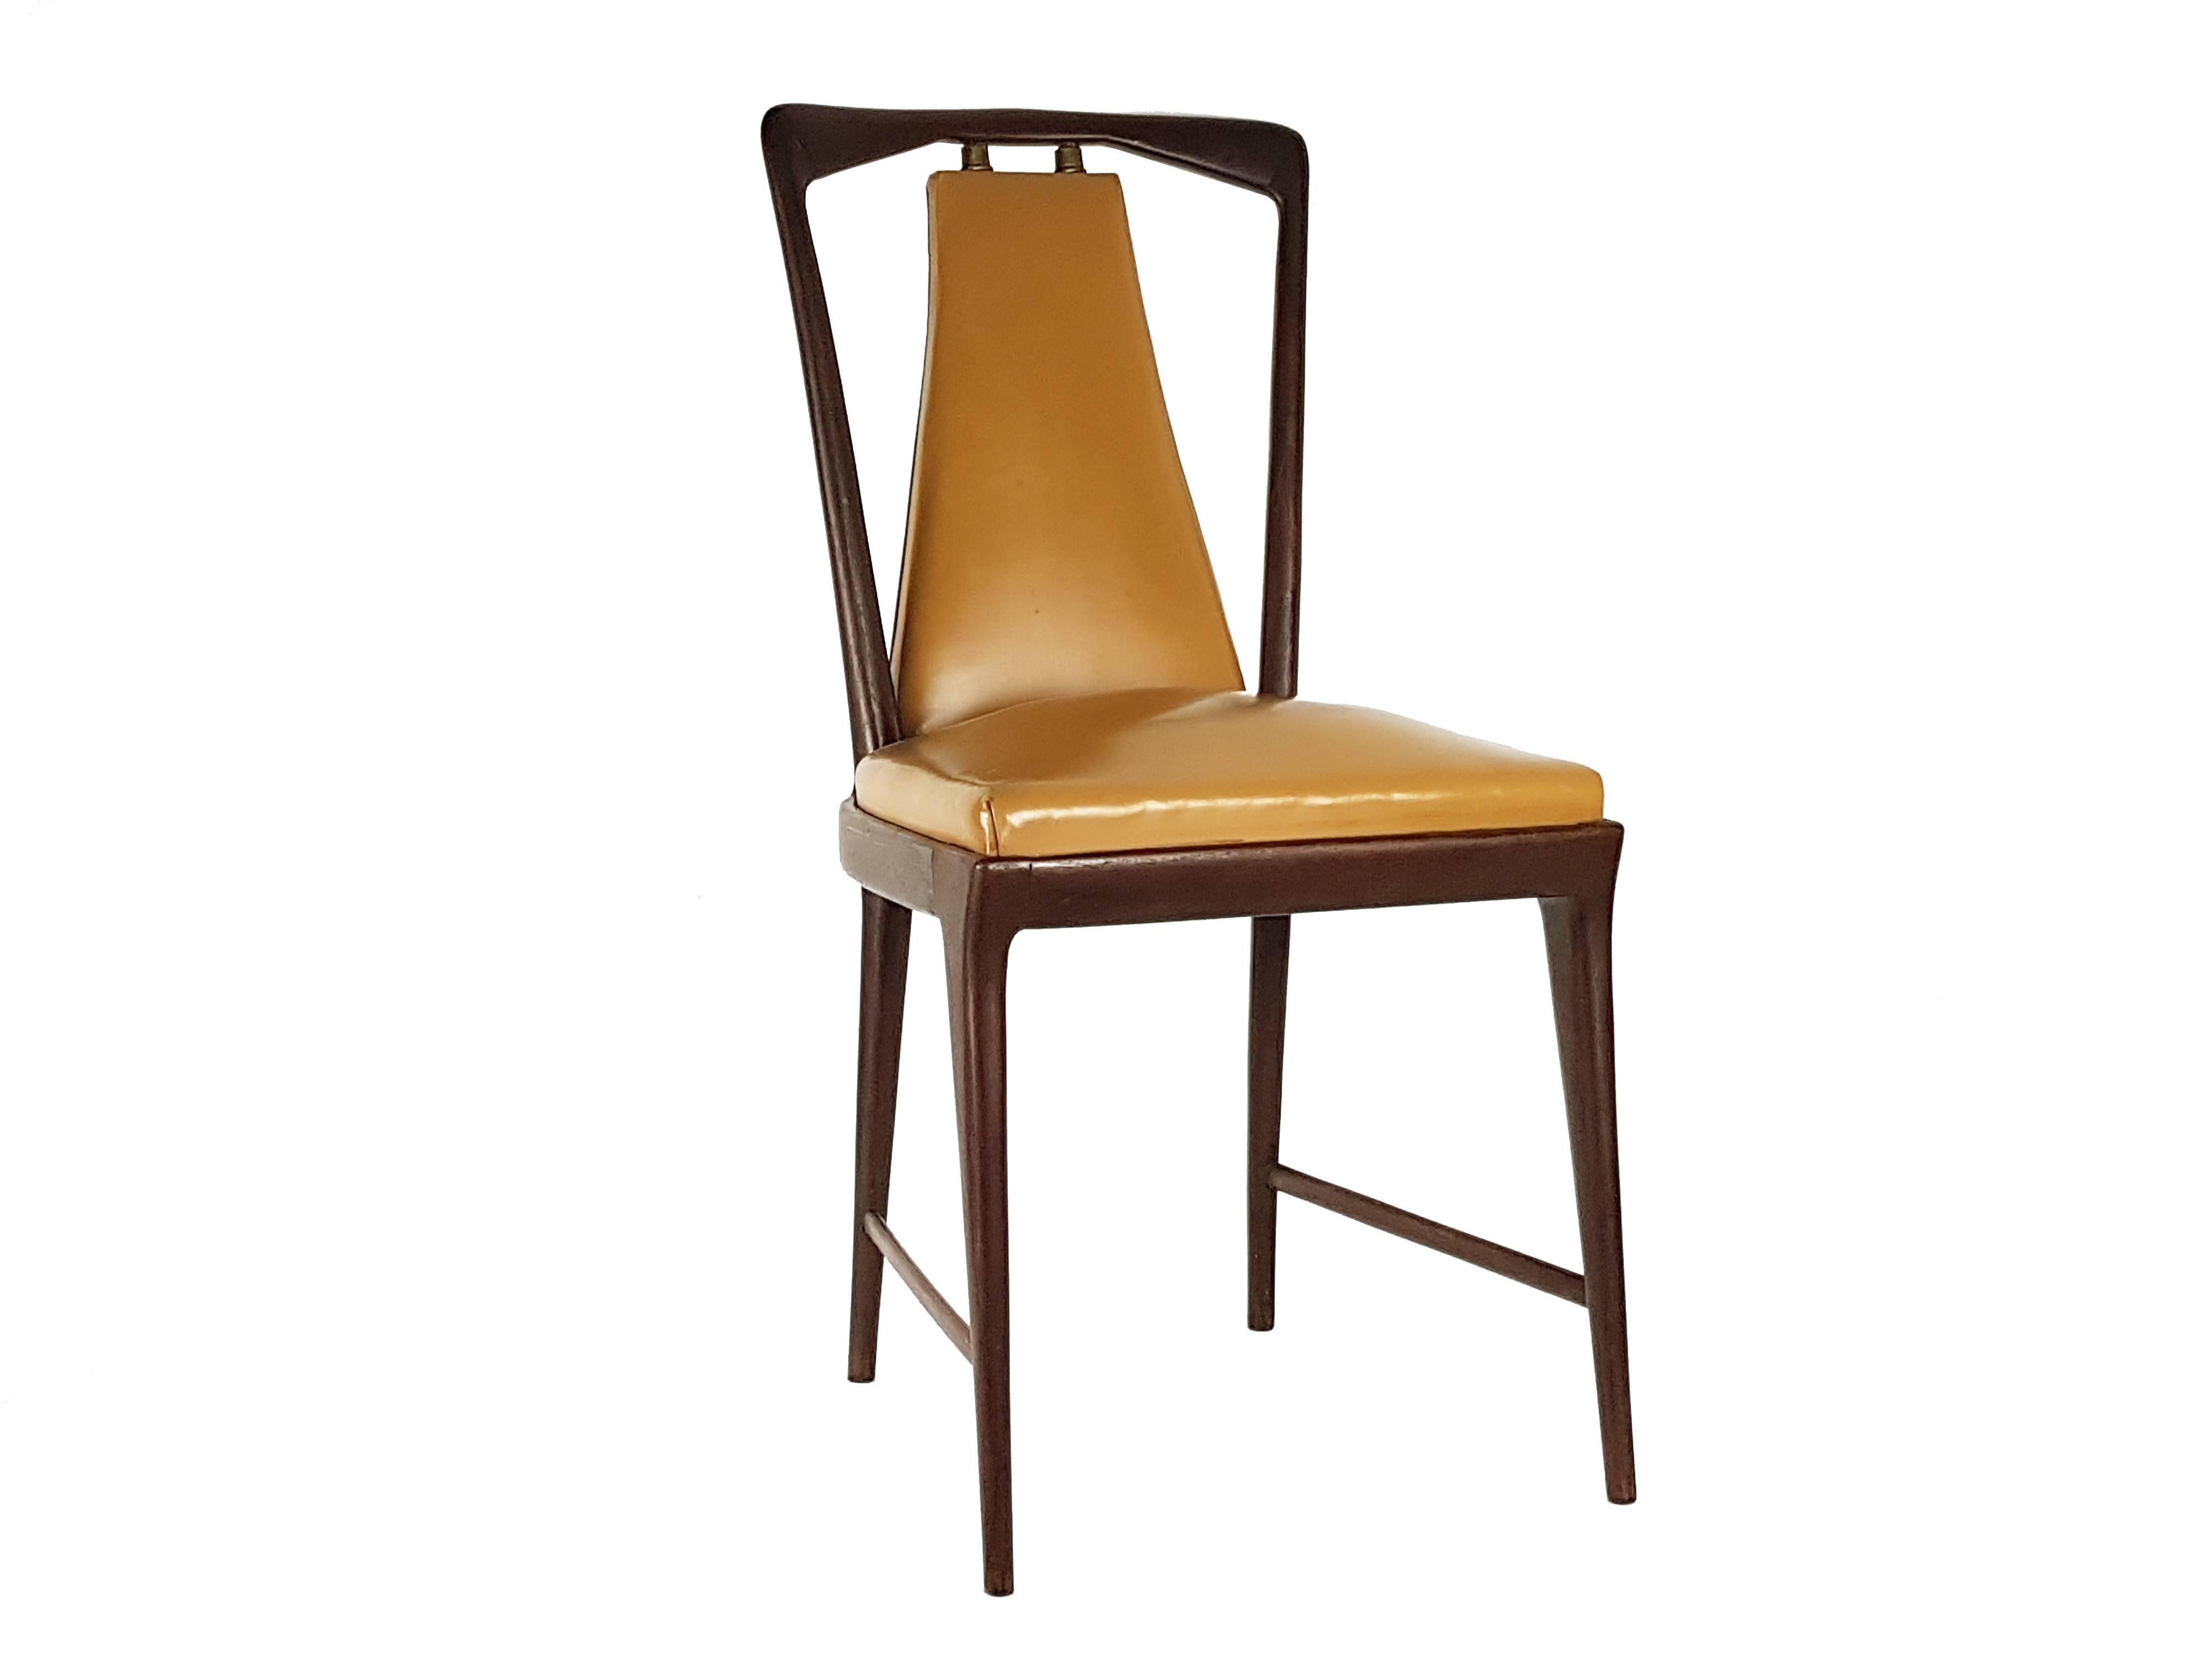 This set of 6 dining chairs was produced in Italy by Fossati, Attilio & Arturo in the late 1940s. The chairs are made from dark-brown wooden structure with a light-brown skai seat and back. The set remains in very good vintage condition.